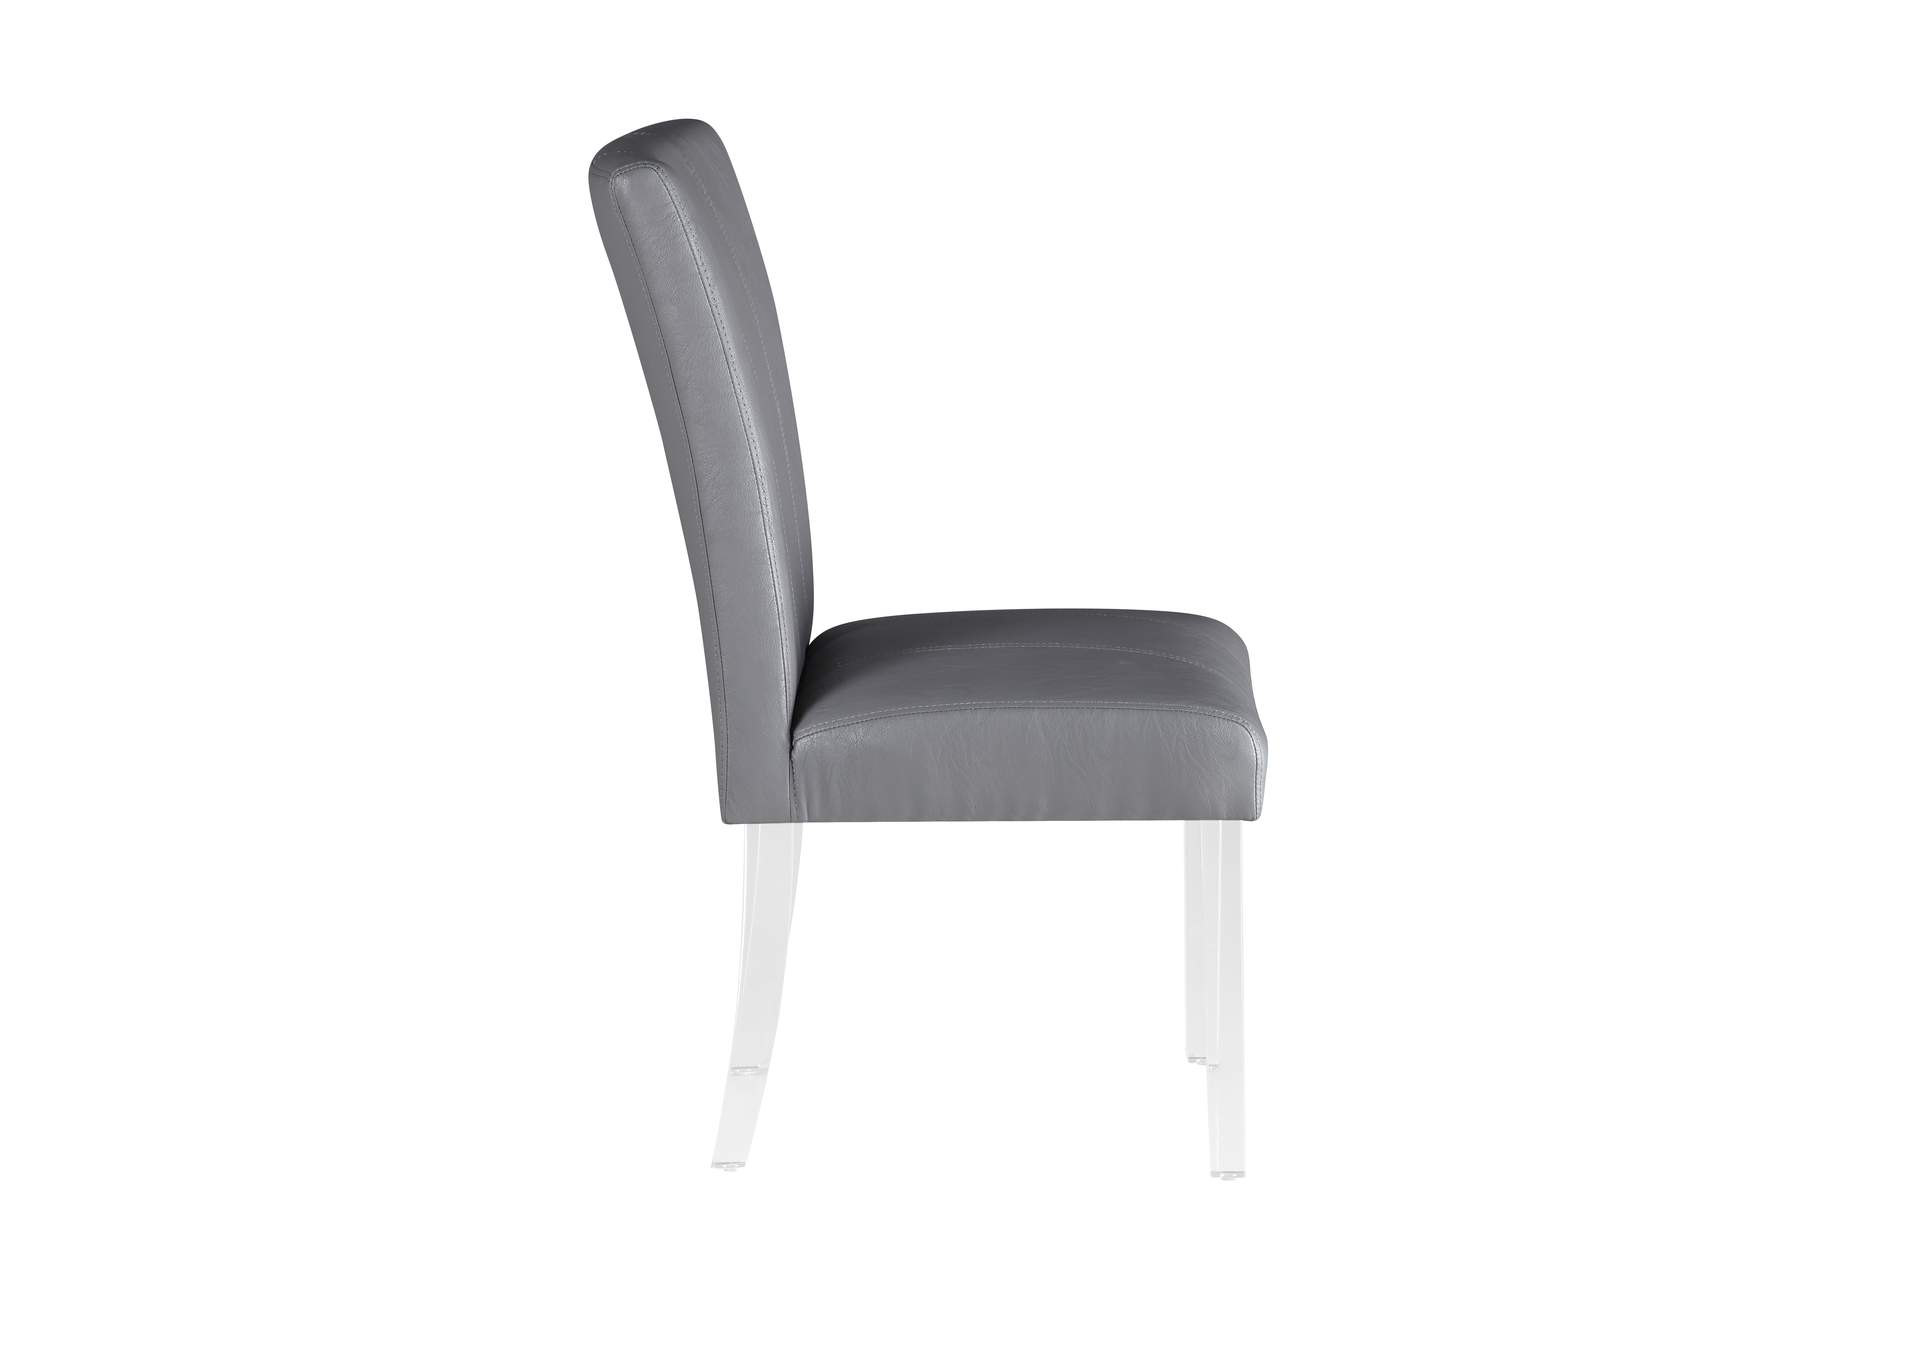 Contemporary Curved Flare-Back Parson Side Chair [Set of 2],Chintaly Imports